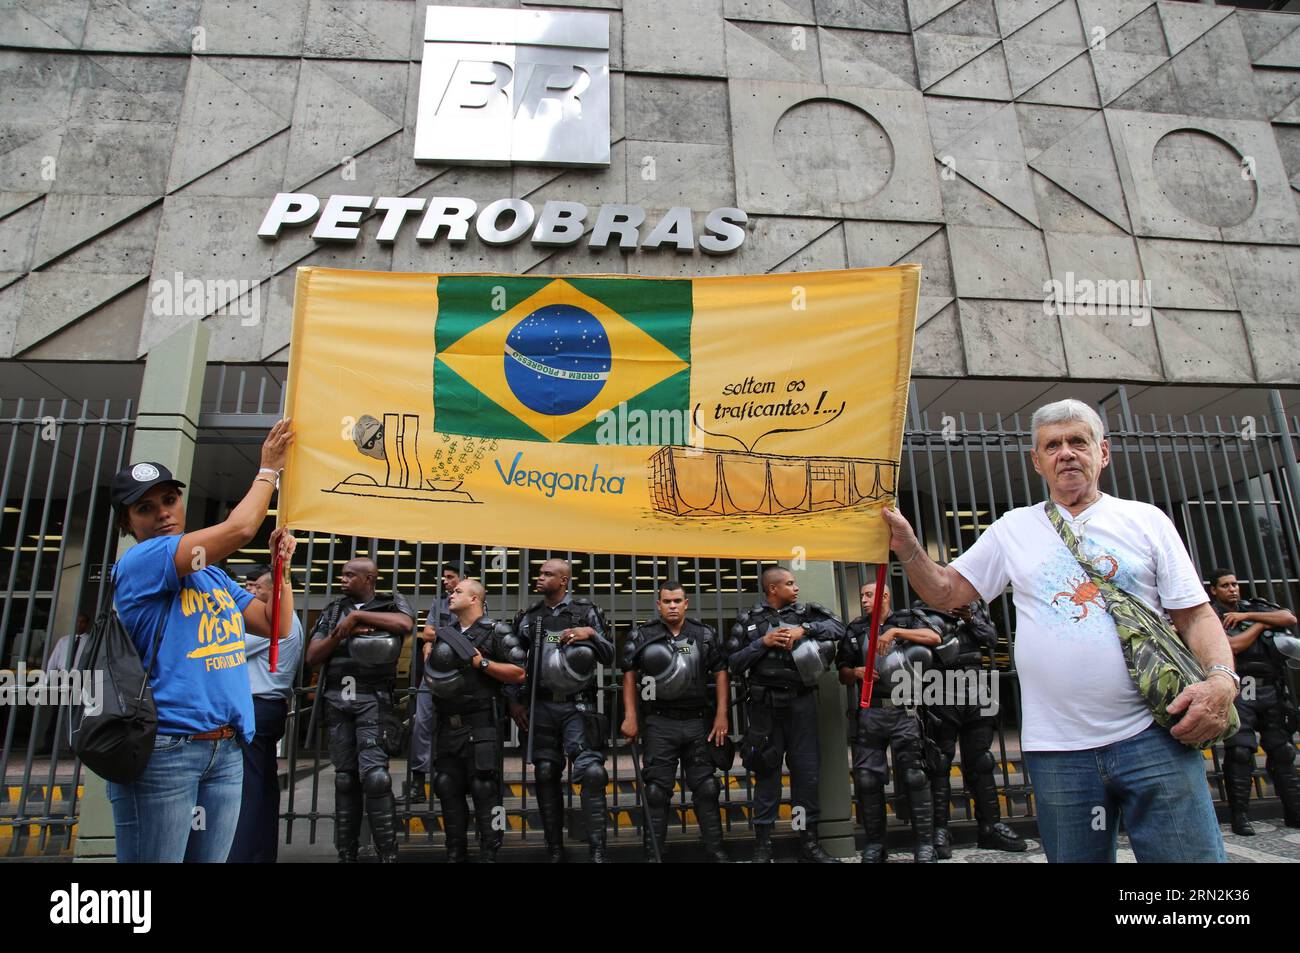 People take part in a demonstration in front of the headquarters of Petrobras in Rio de Janeiro, Brazil, on March 11, 2015. The demonstrators showed their support to the federal judge Sergio Moro, responsible of the investigations of the case Lava Jato, about the corruption in the state oil company Petrobras, according to local press. Daniel Castelo Branco/Agencia o Dia/AGENCIA ESTADO) BRAZIL OUT BRAZIL-RIO DE JANEIRO-SOCIETY-DEMONSTRATION e AE PUBLICATIONxNOTxINxCHN   Celebrities Take Part in a Demonstration in Front of The Headquarters of Petrobras in Rio de Janeiro Brazil ON March 11 2015 T Stock Photo